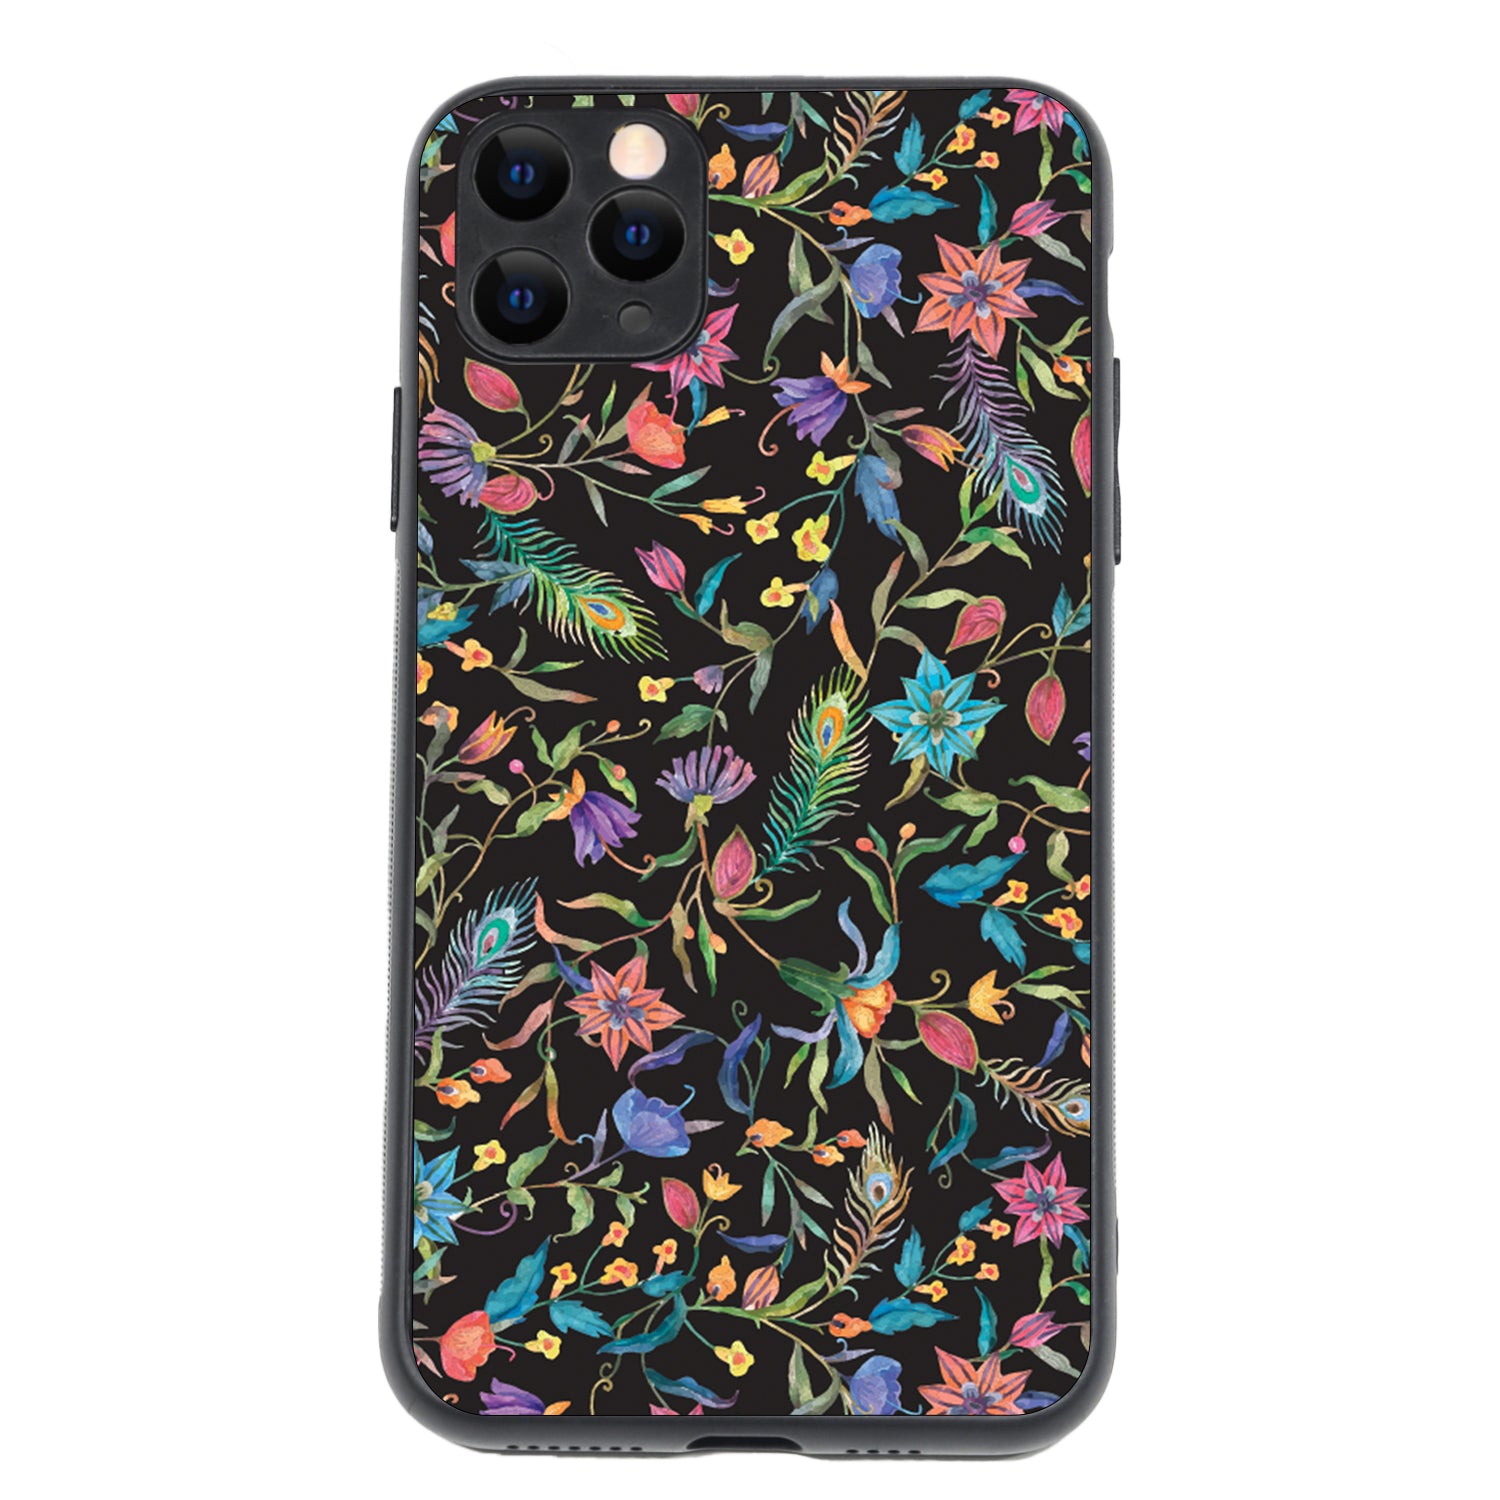 Flower Floral iPhone 11 Pro Max Case